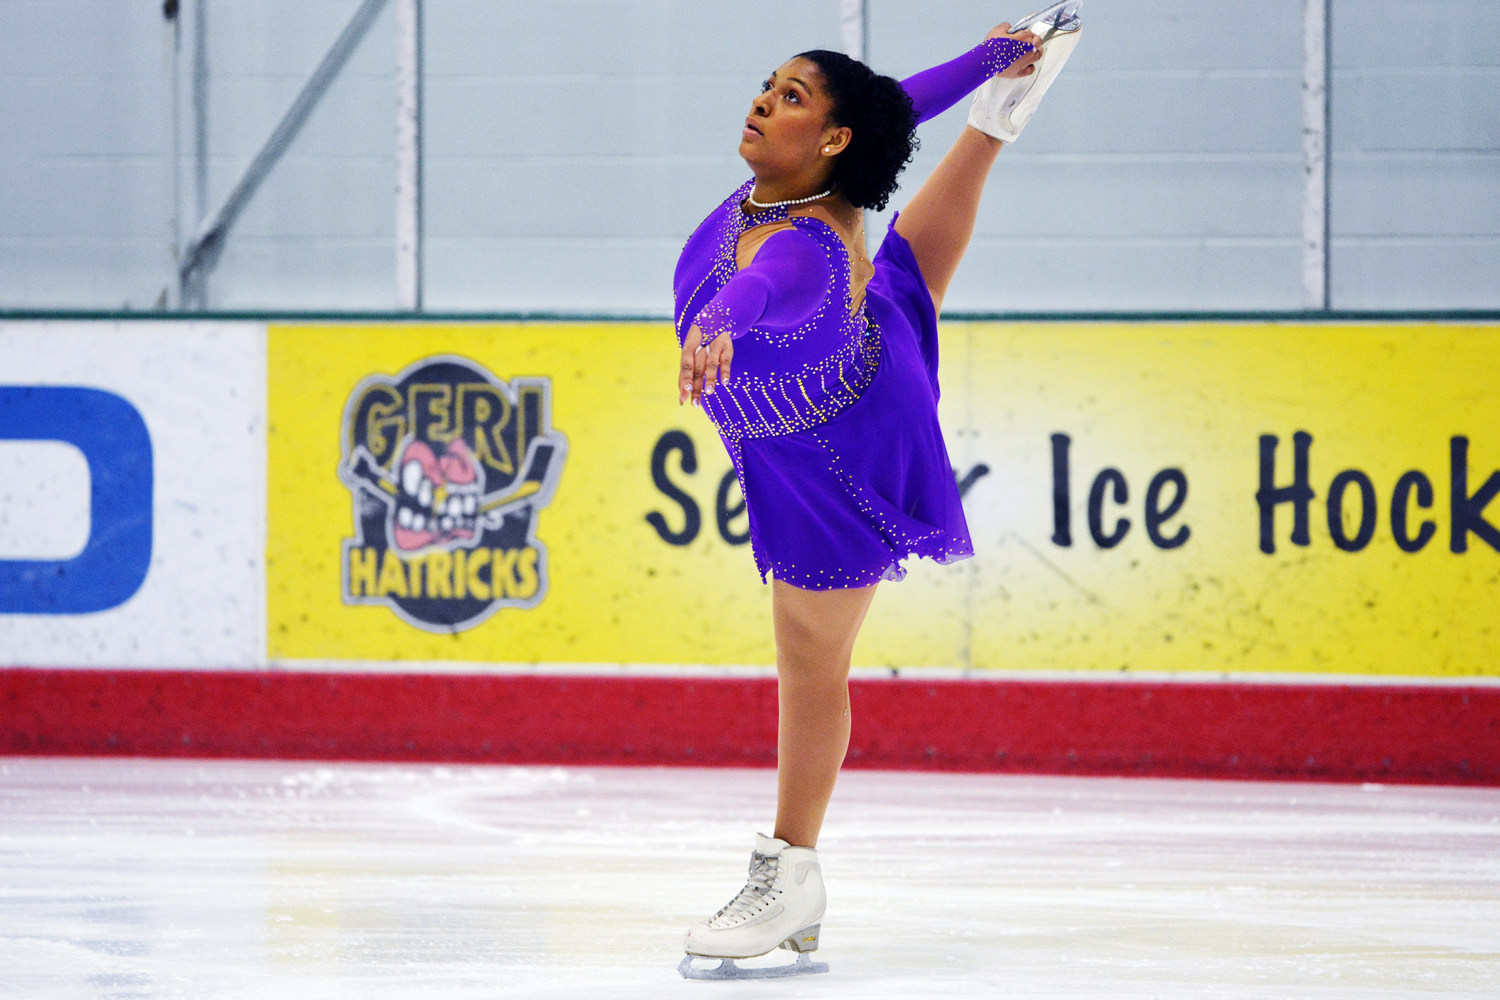 We don't look like them': Black figure skaters face barriers to